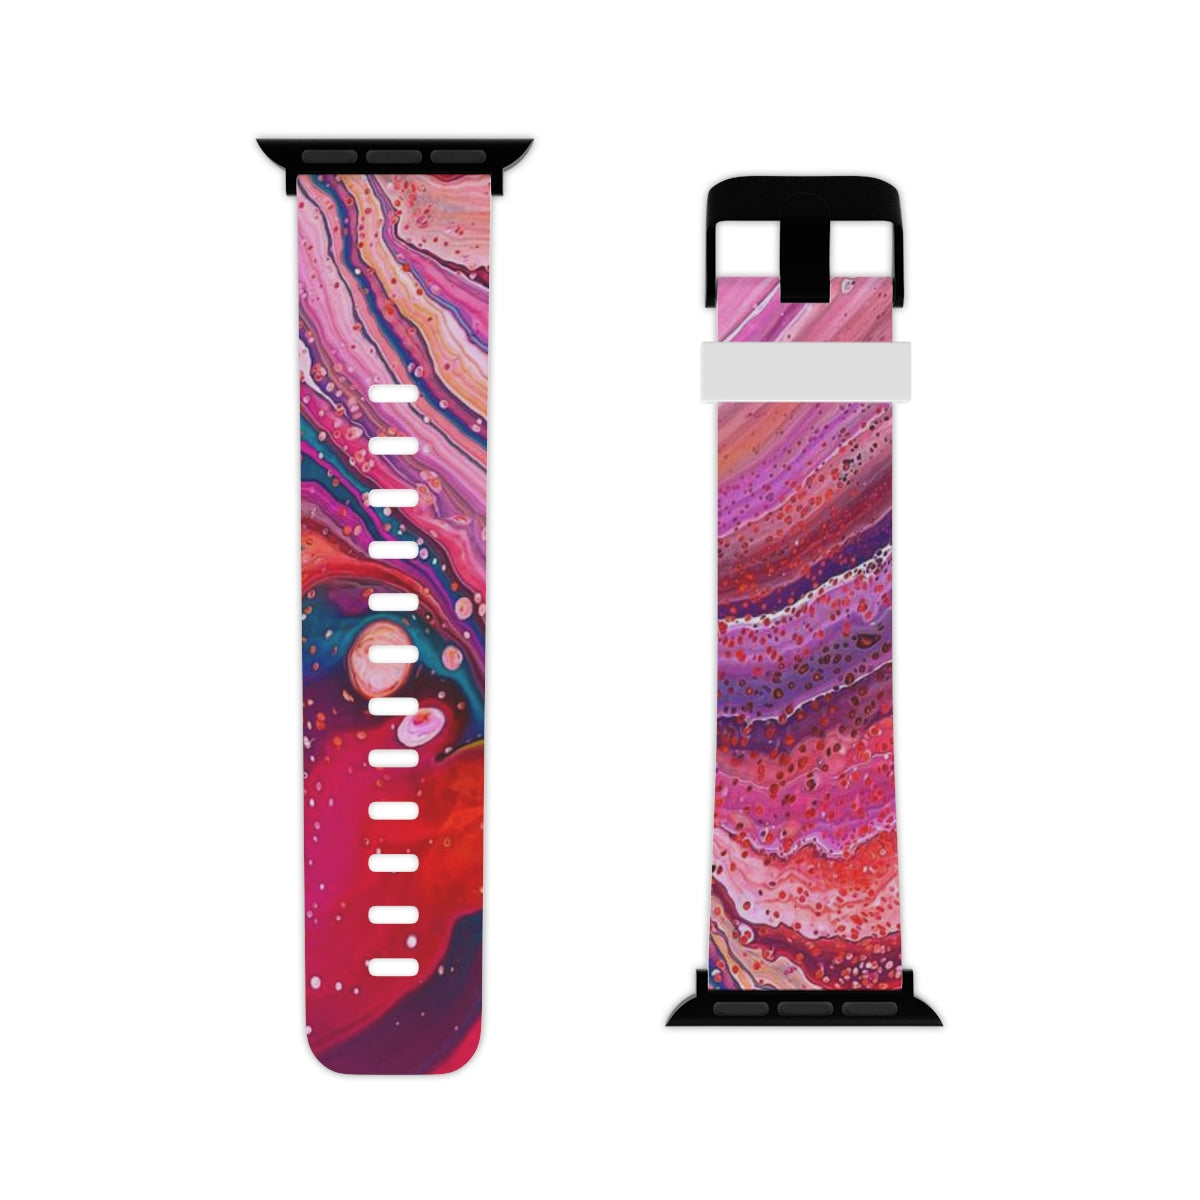 Watch Band for Apple Watch - Cosmic design